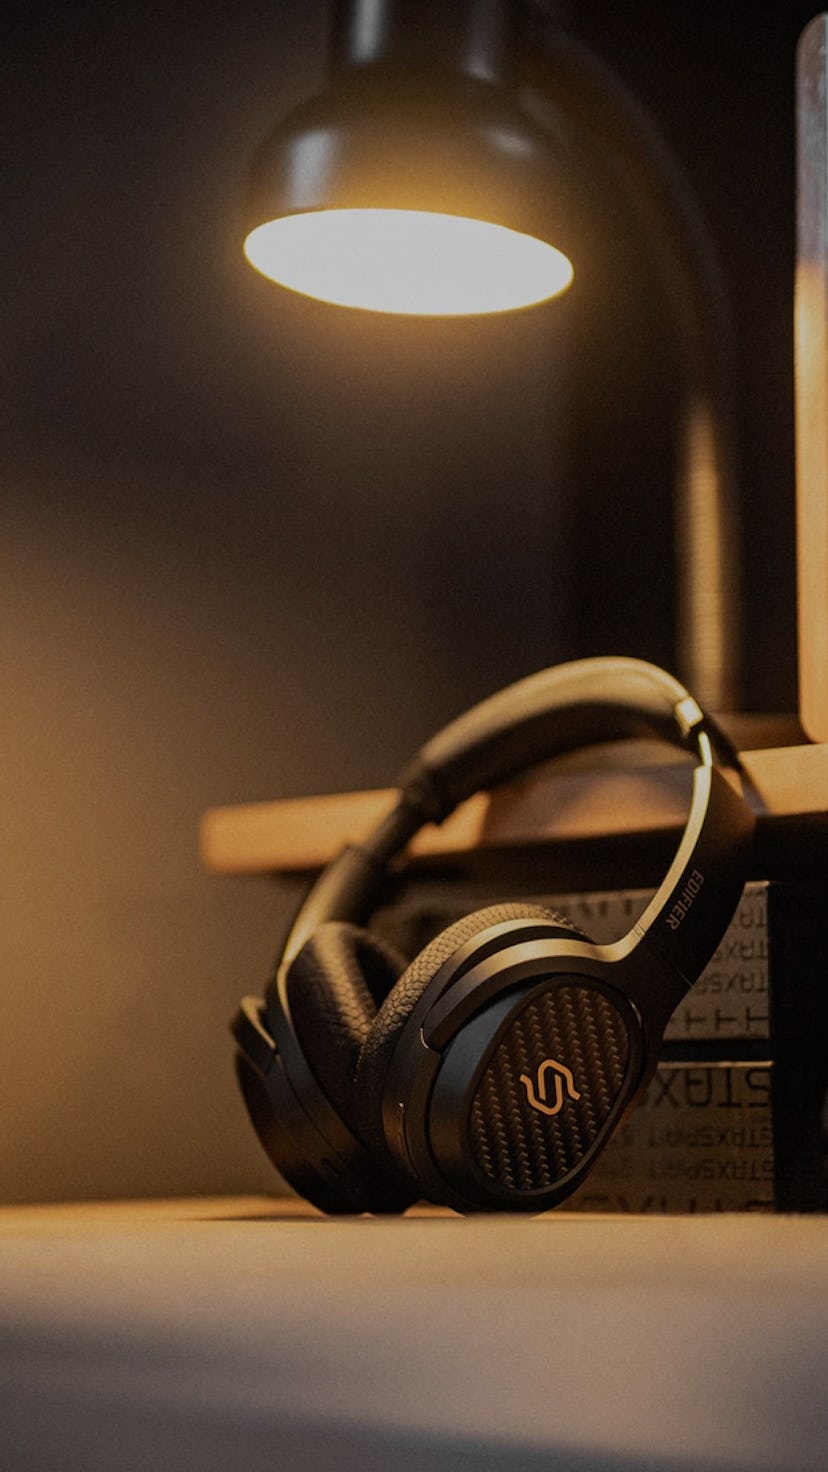 The Edifier Stax Spirit S3 are the only wireless headphones that currently support Snapdragon Sound